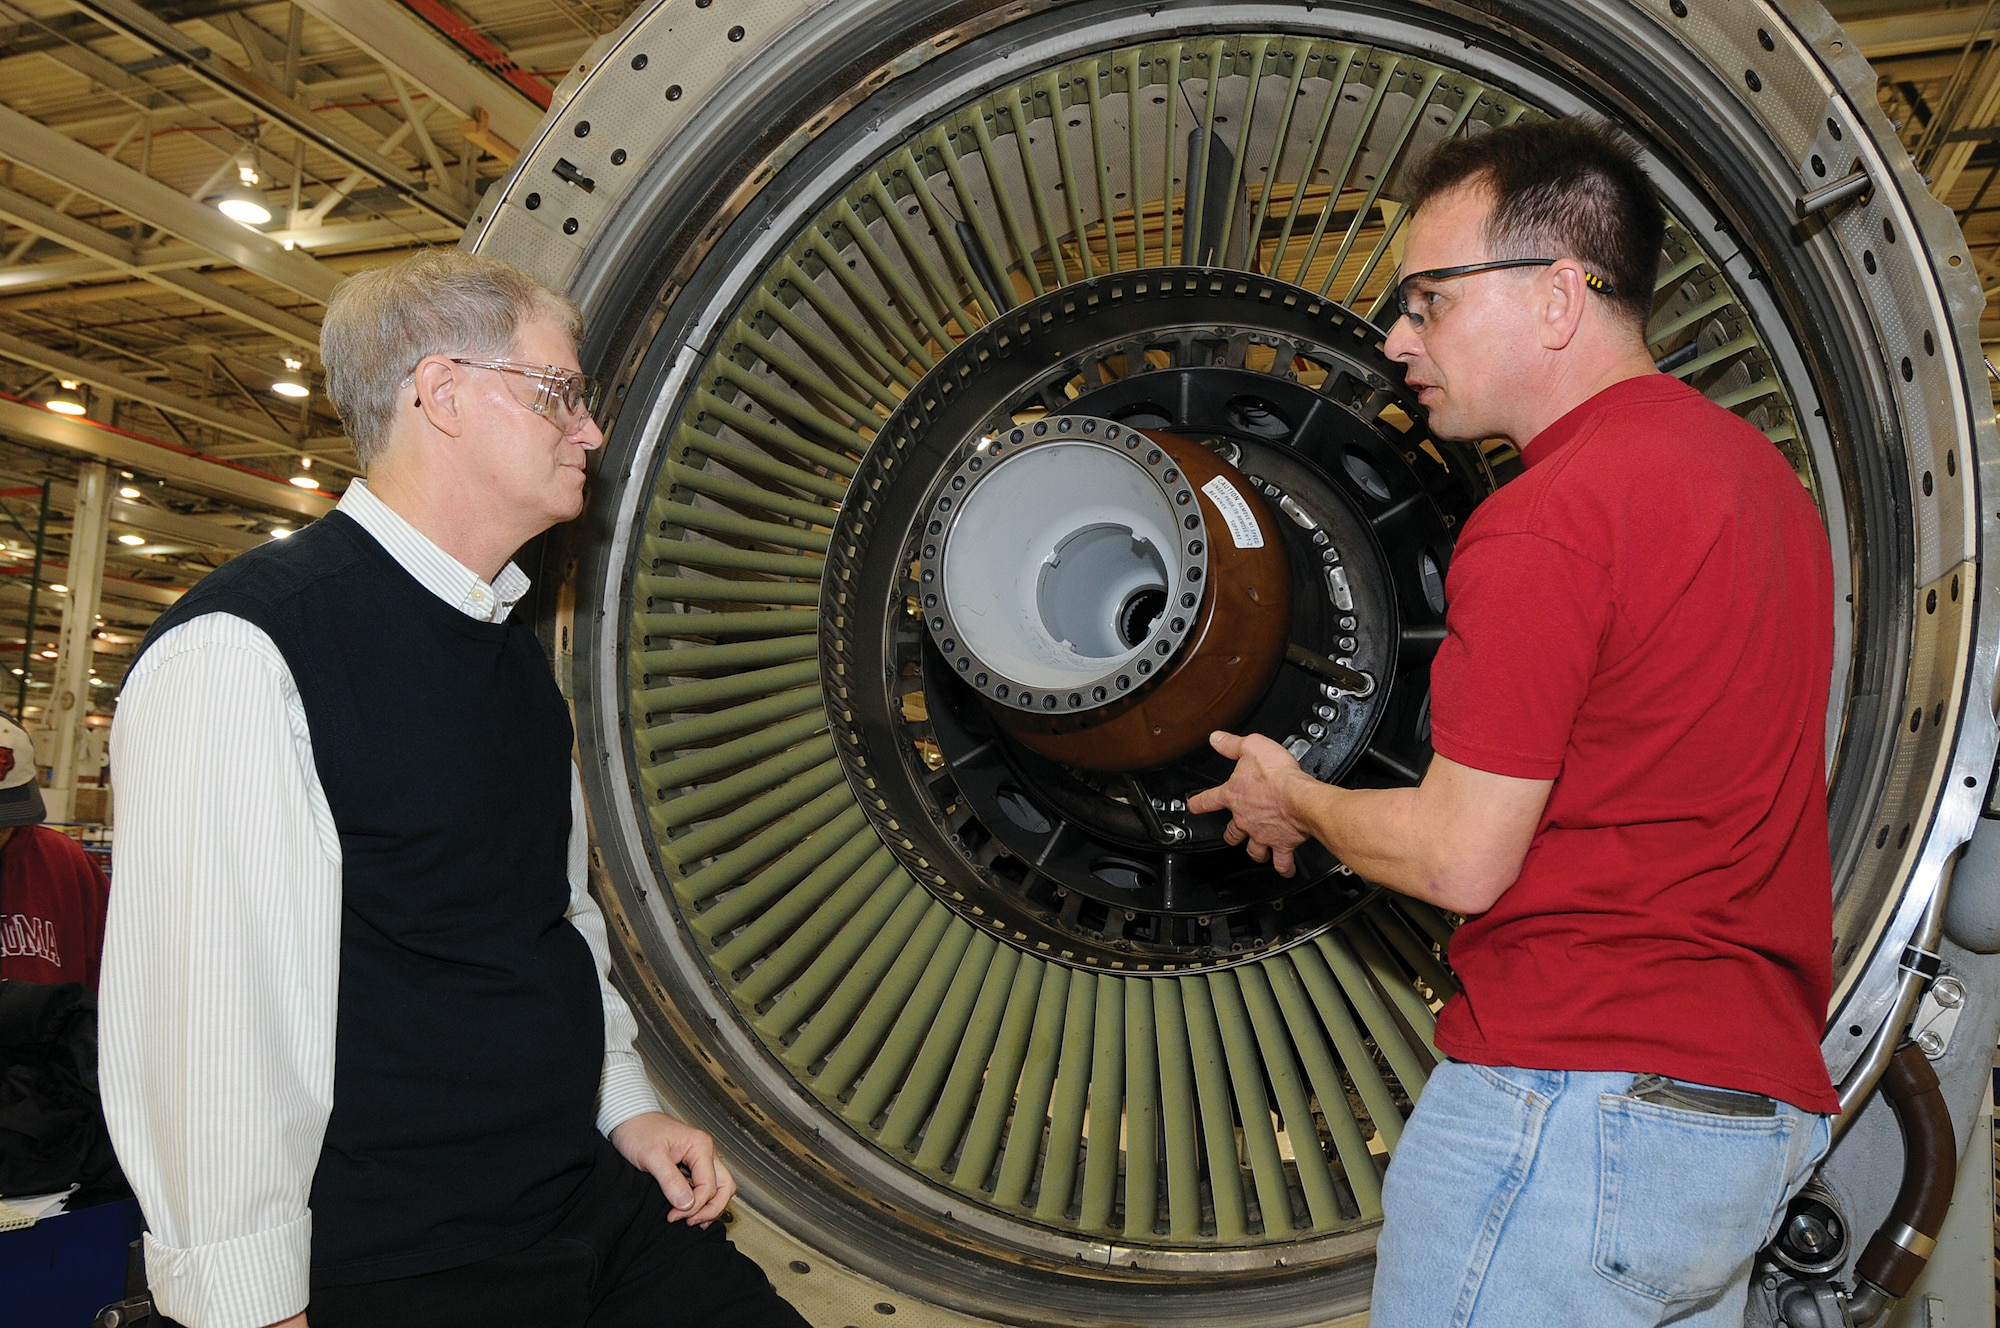 Reaping positive benefits of the relationship between the Air Force Life Cycle Management Center and the Air Force Sustainment Center, engineers and mechanics work to quickly resolve any repair issues during production here at Tinker. In Bldg. 9001’s F108 Navy/Air Force engine shop, aerospace engineer Michael Denny, left, and engine mechanic Rick Thompson discuss the life cycle fatigue and possible routine maintenance requirements of the number 1-2 bearing support. (Air Force photo by Margo Wright)